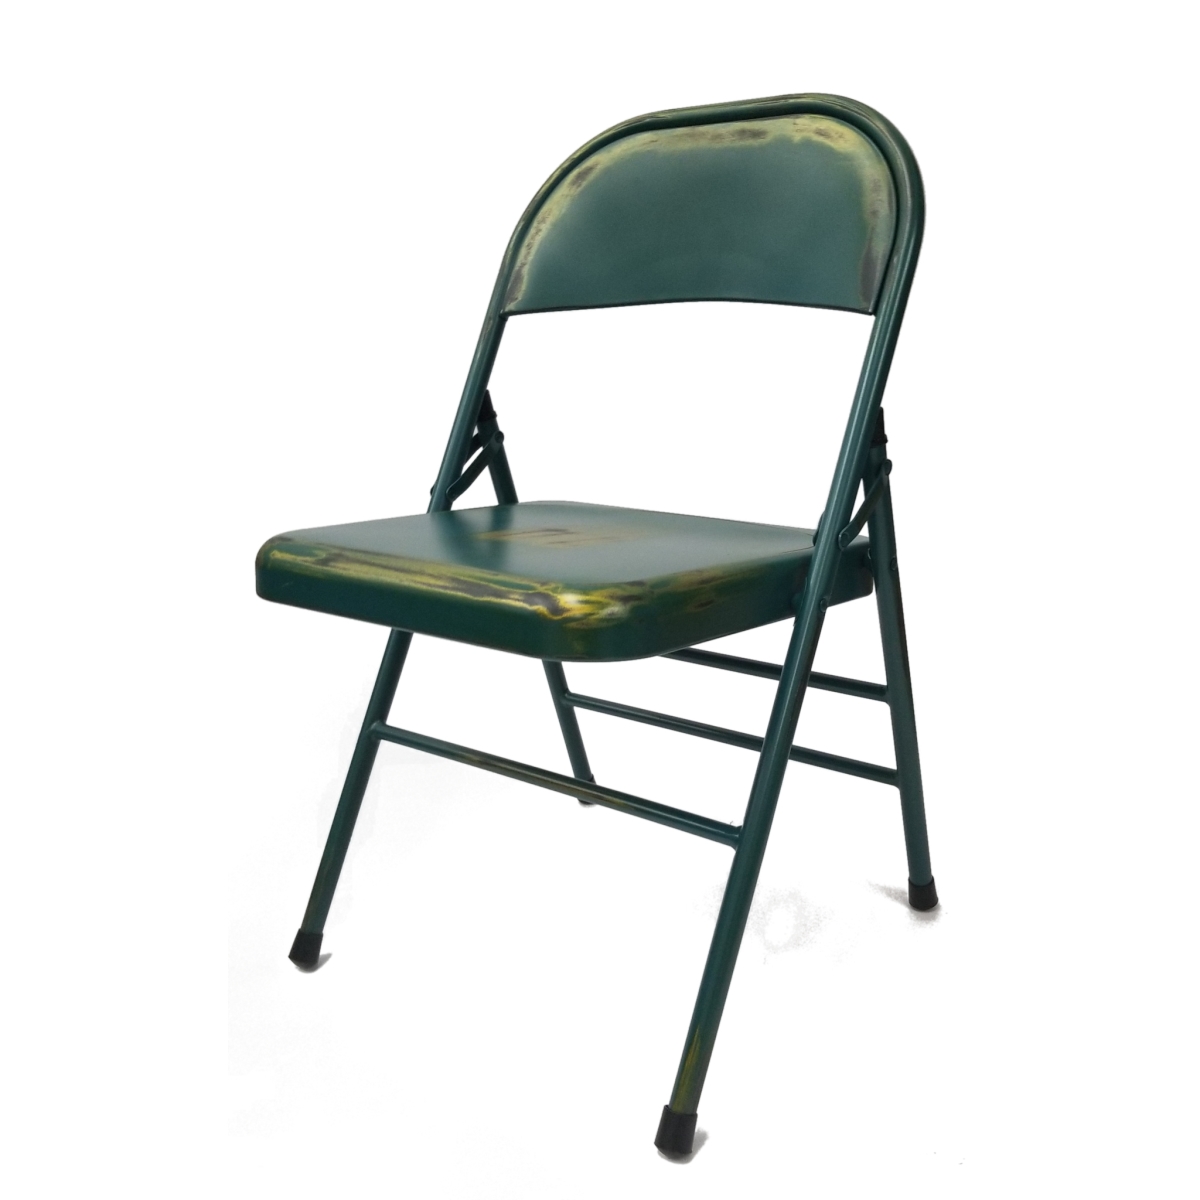 Fmi10294-turquoise Turquoise Antique Folding Chair - Turquoise